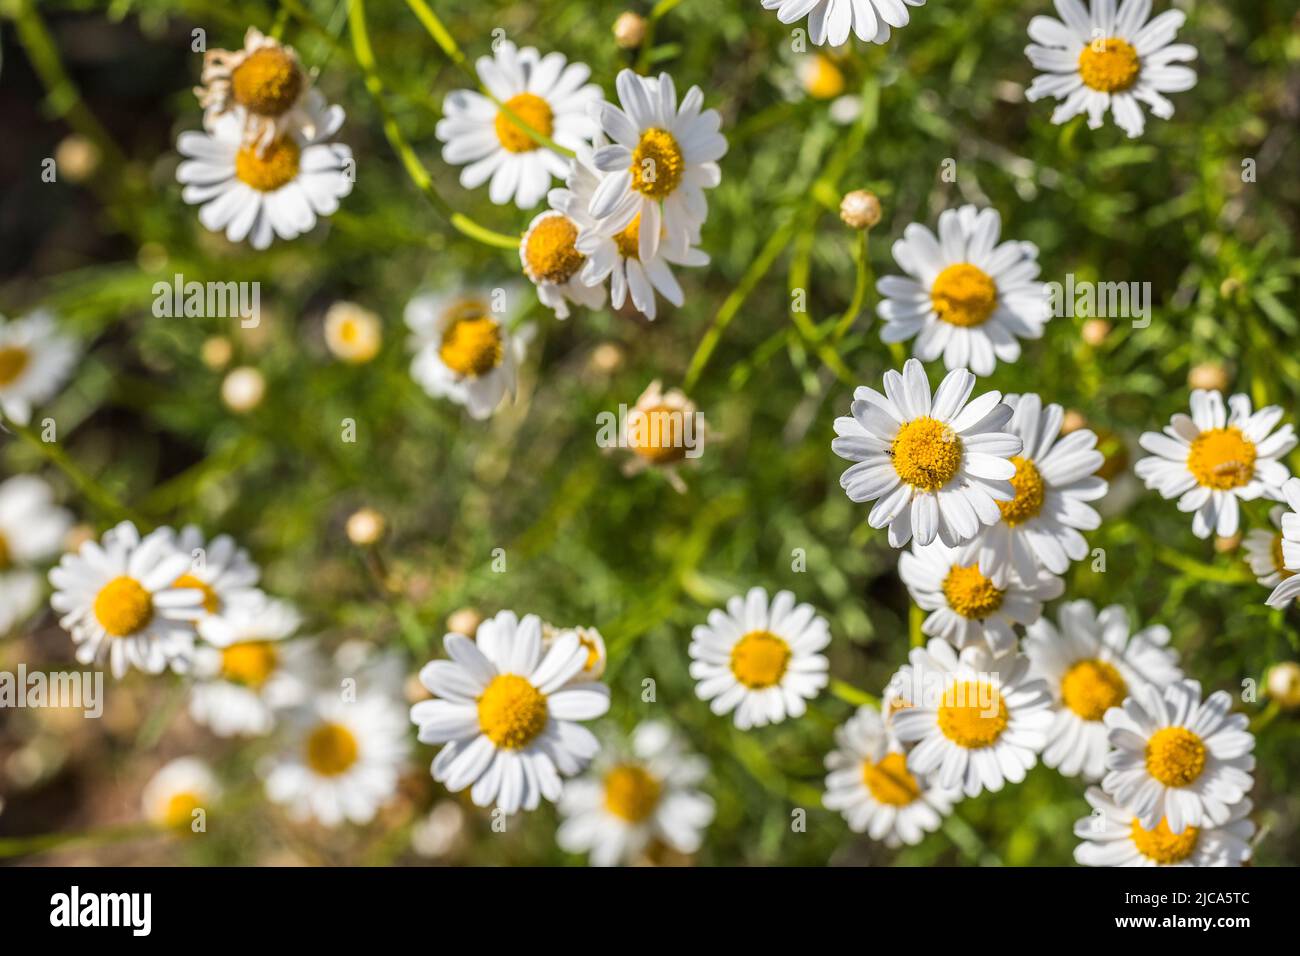 Argyranthemum frutescens, known as Paris daisy, marguerite or marguerite daisy, is a perennial plant known for its flowers. Stock Photo